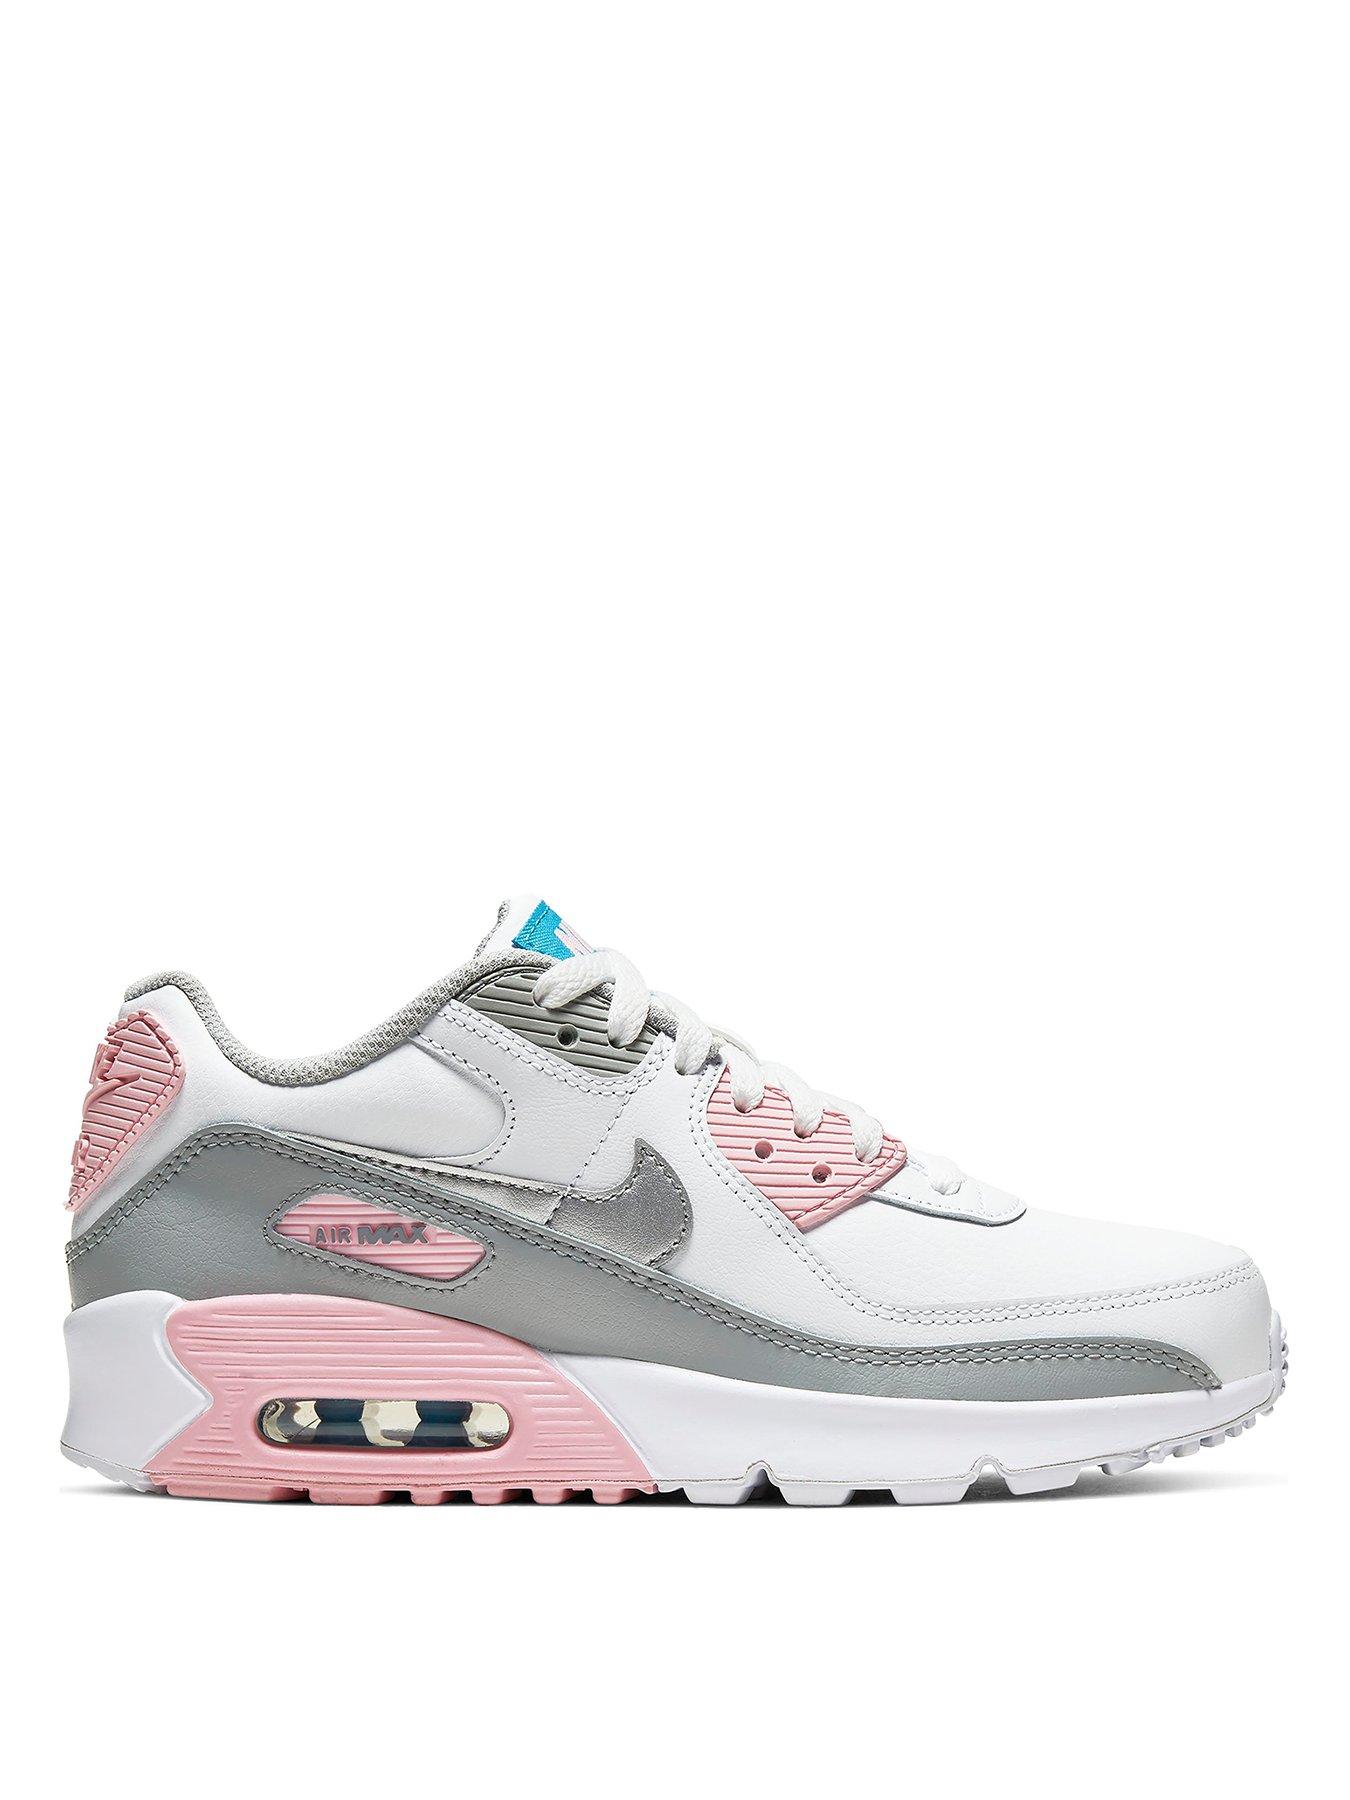 nike air max 90 infant toddler trainers